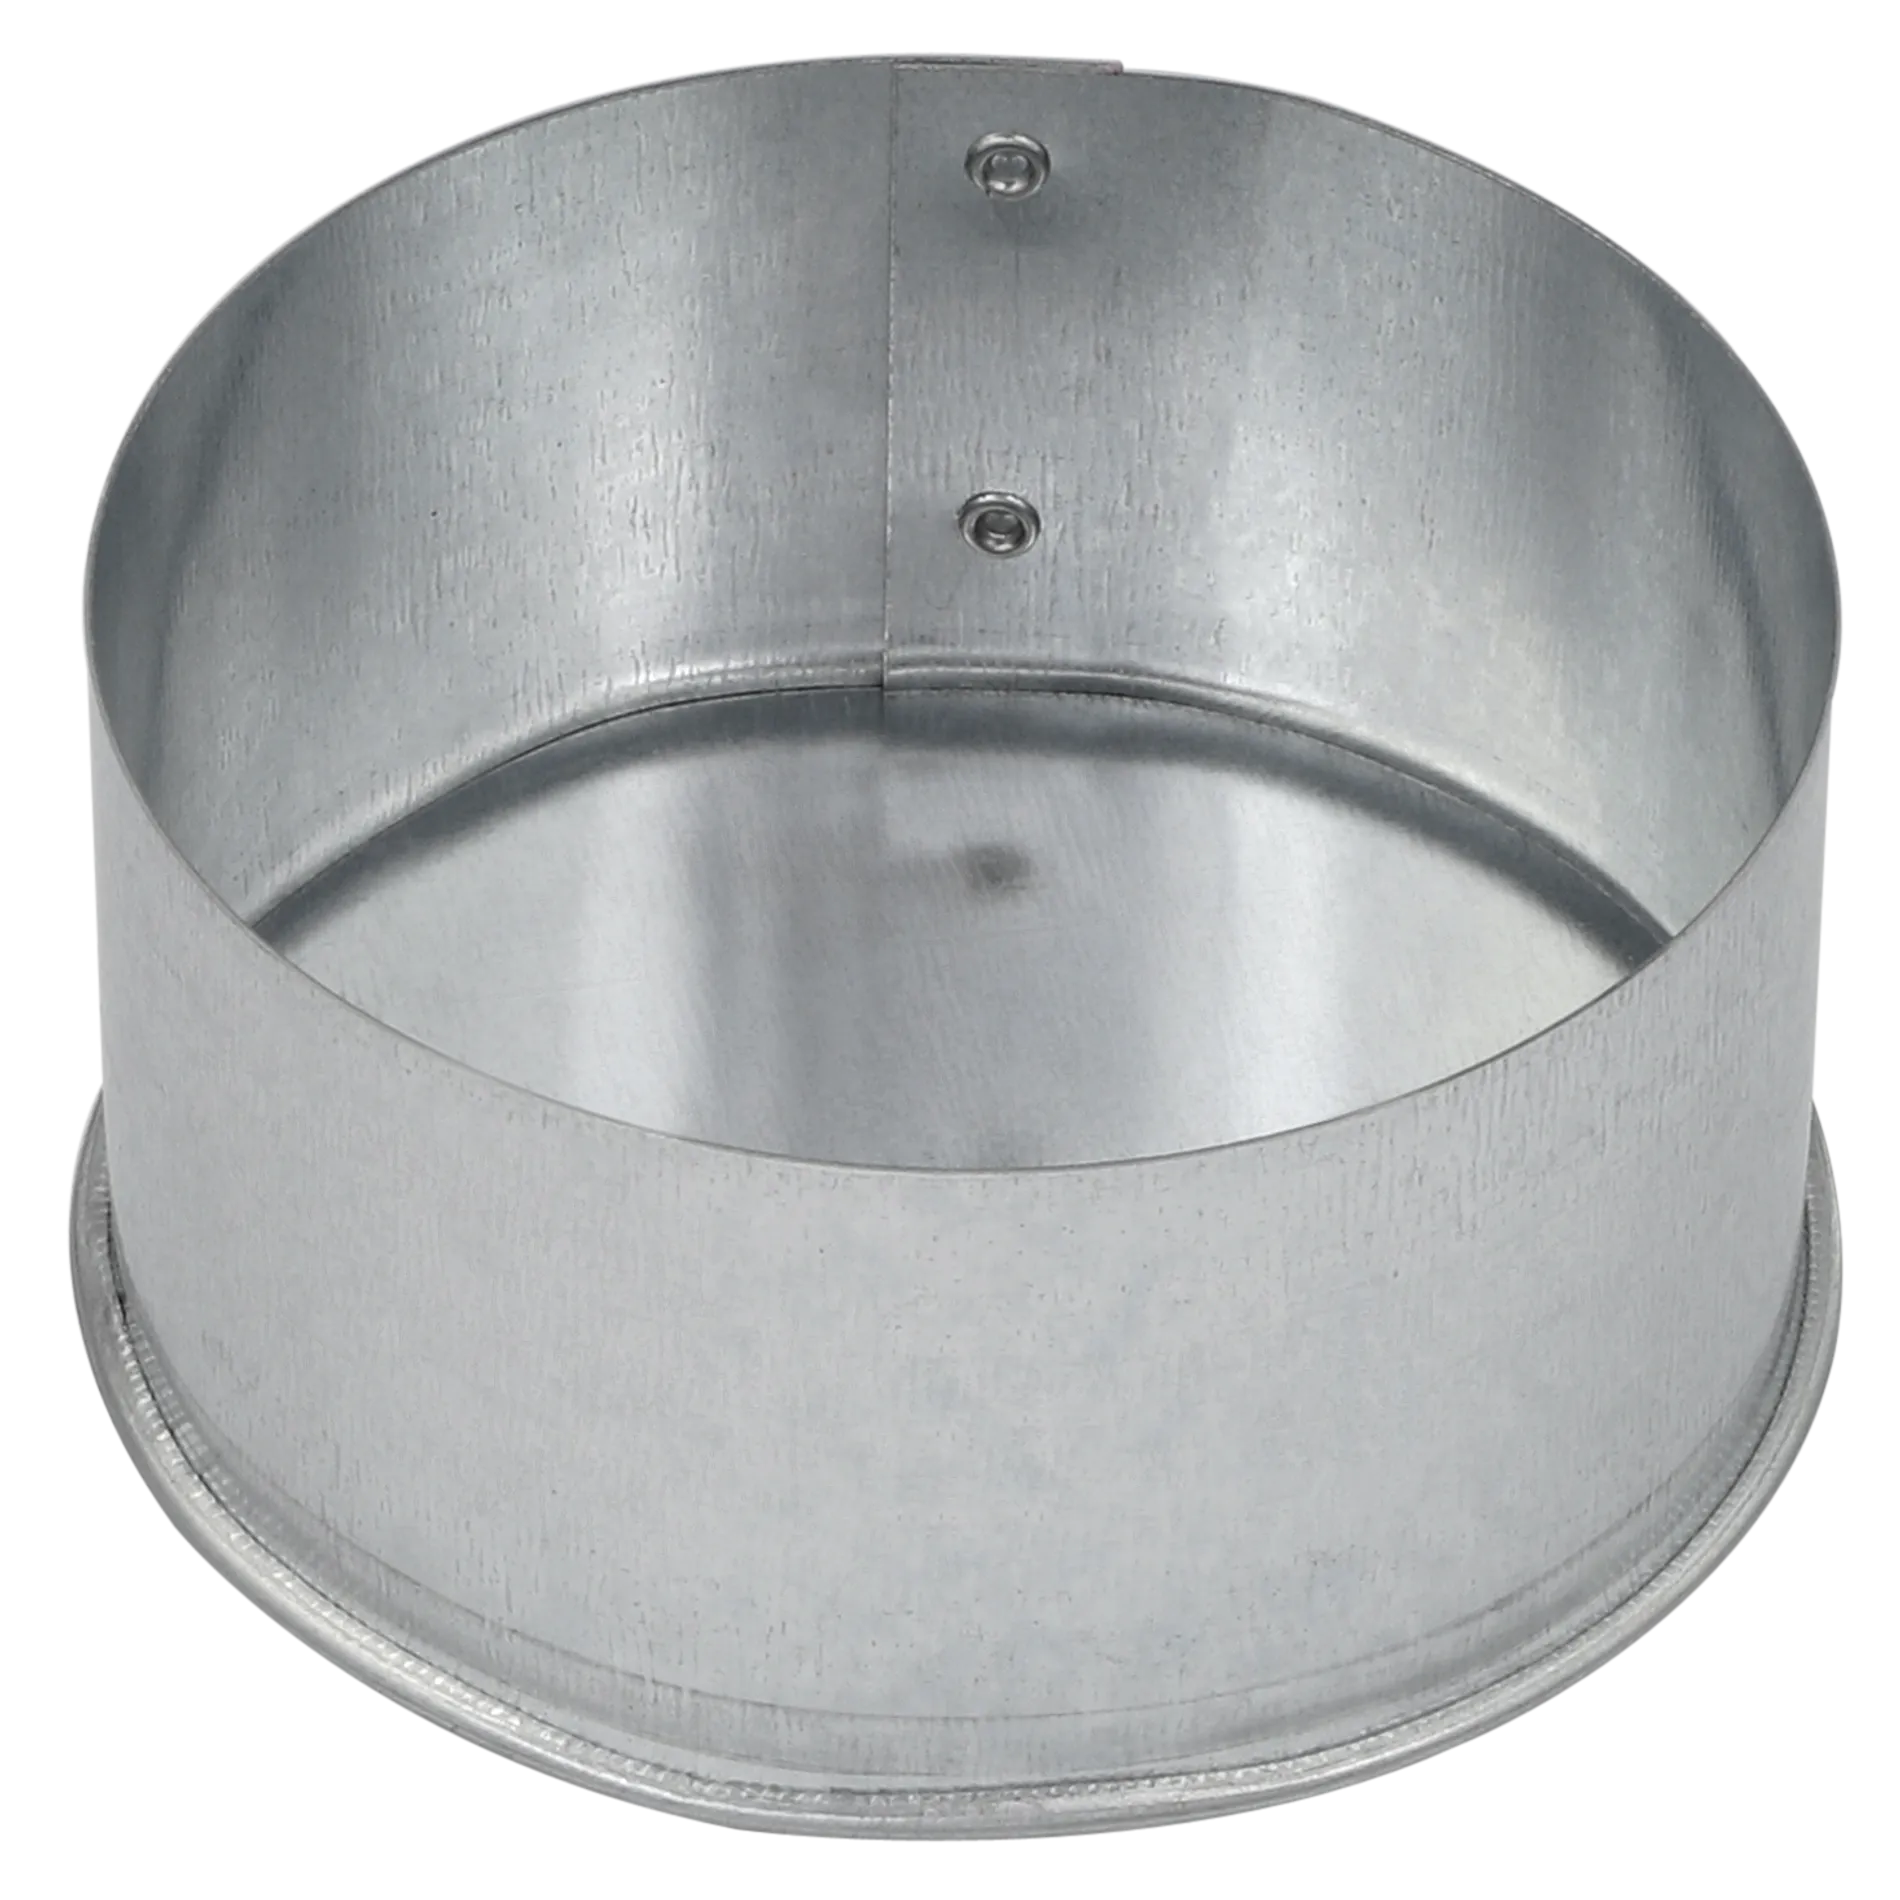 26 ga. 8 End Cap Round Duct Fitting 